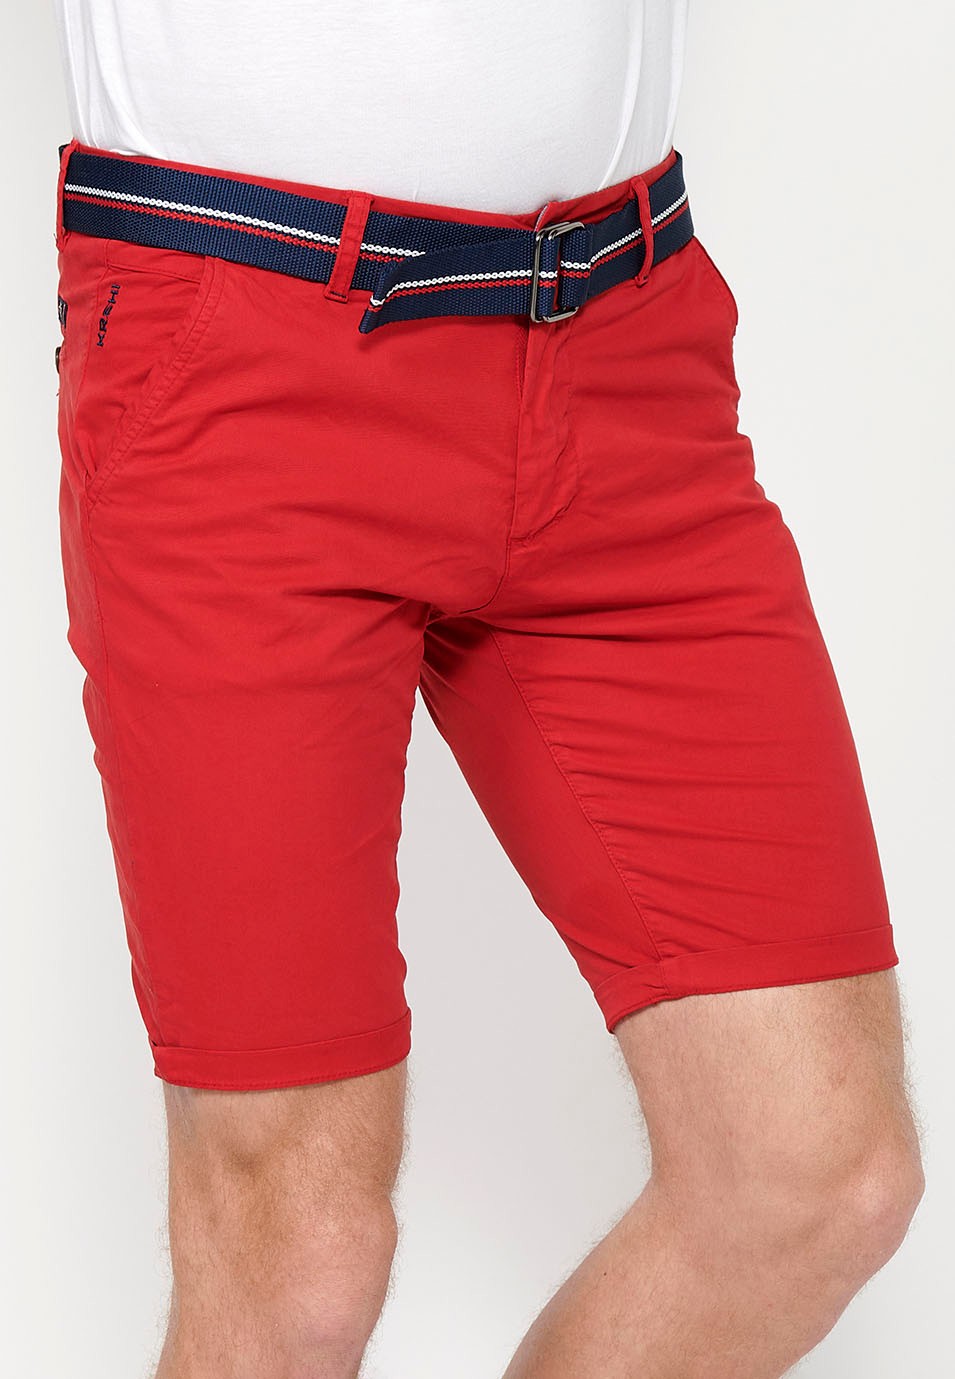 Shorts with cuffed finish with front closure with zipper and button and belt in Red for Men 1